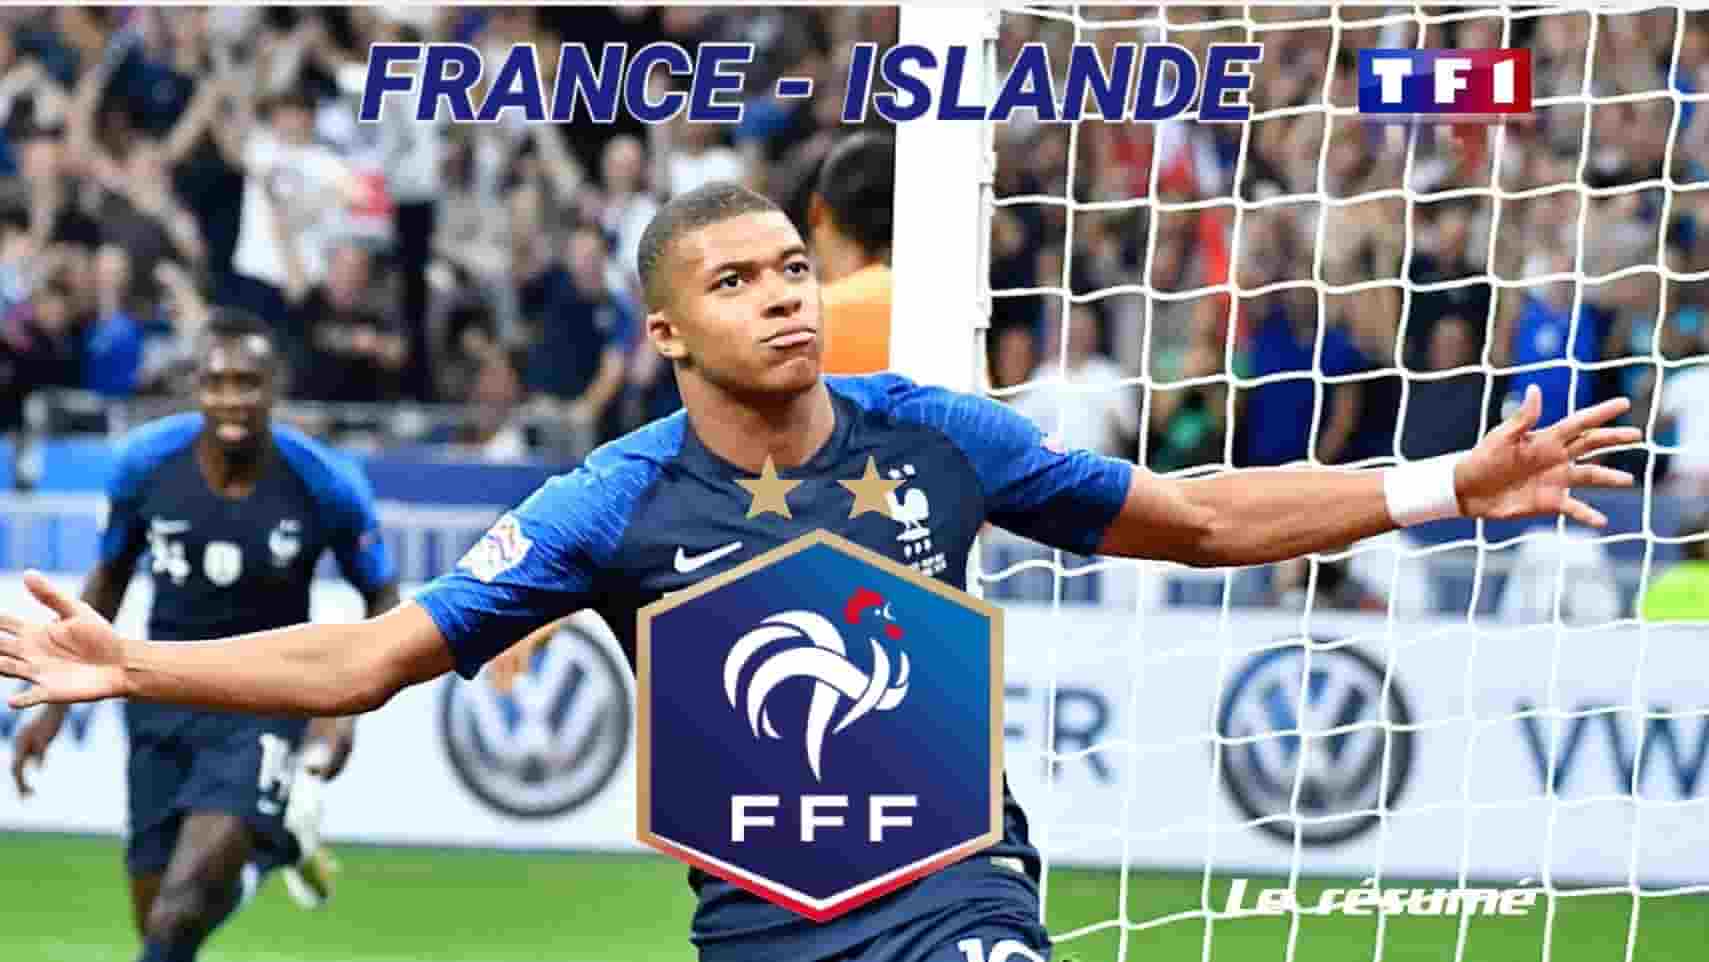 Match amical : France - Islande - ©/-\ll in One TV, All rights reserved. Do not copy. Reproduction Interdite